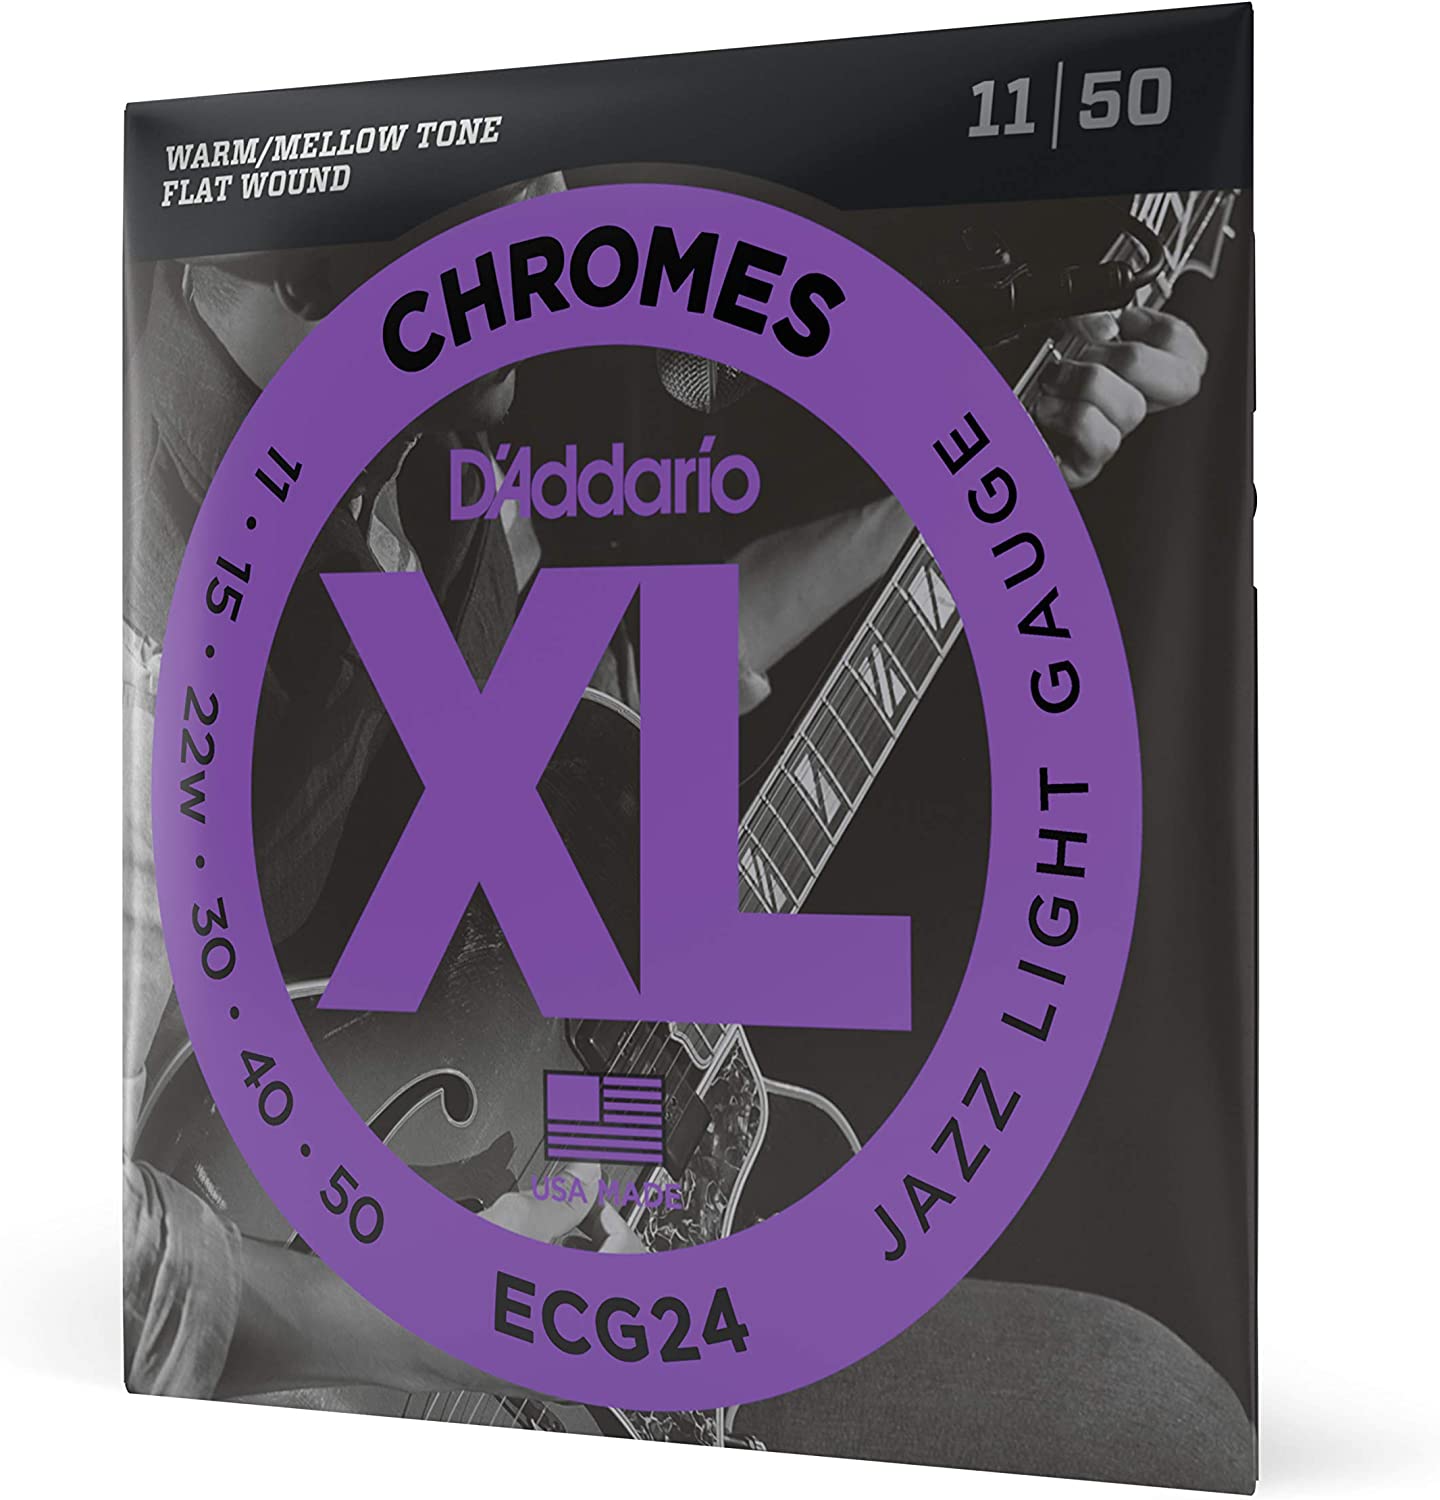 D'Addario XL Chromes Electric Guitar Strings on a white background